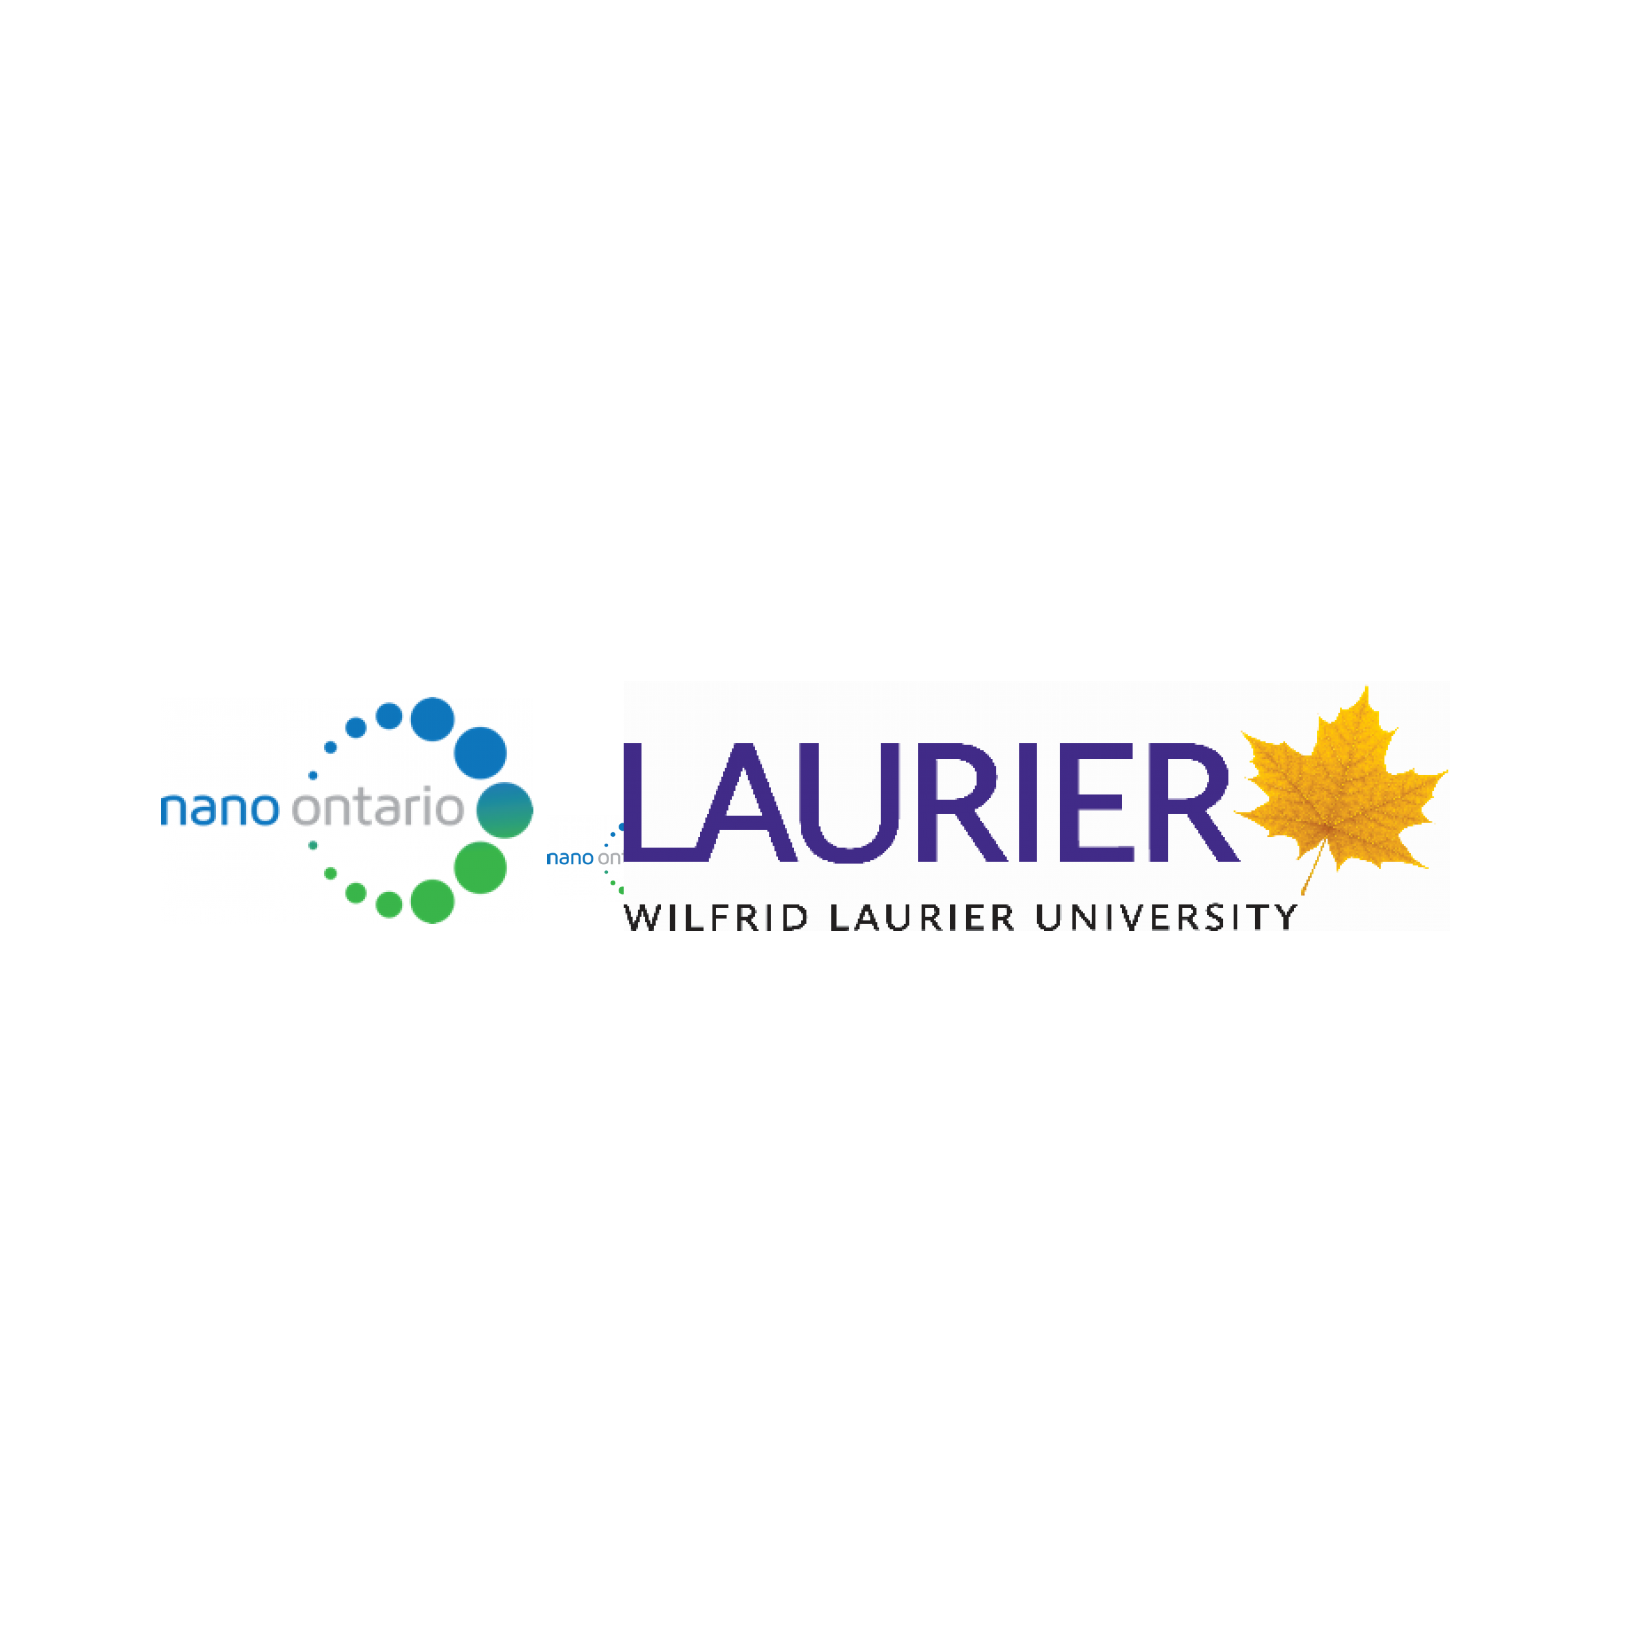 Nano Ontario Conference and Wilfrid Laurier University Logo